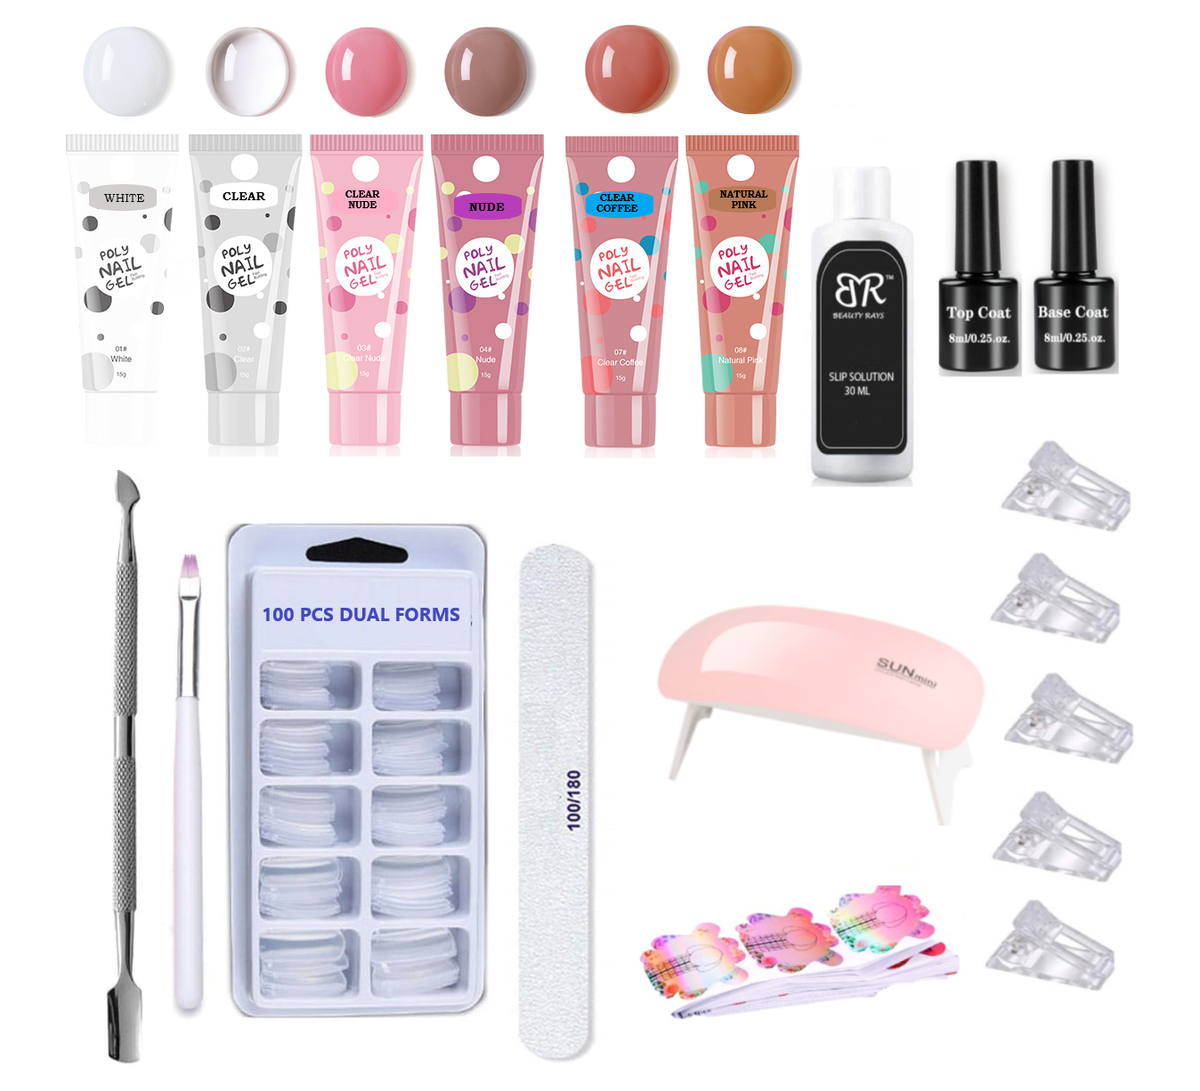 Beauty Rays Polygel Nail Extension Kit with Mini UV LED nail lamp | Buy  Online in South Africa 